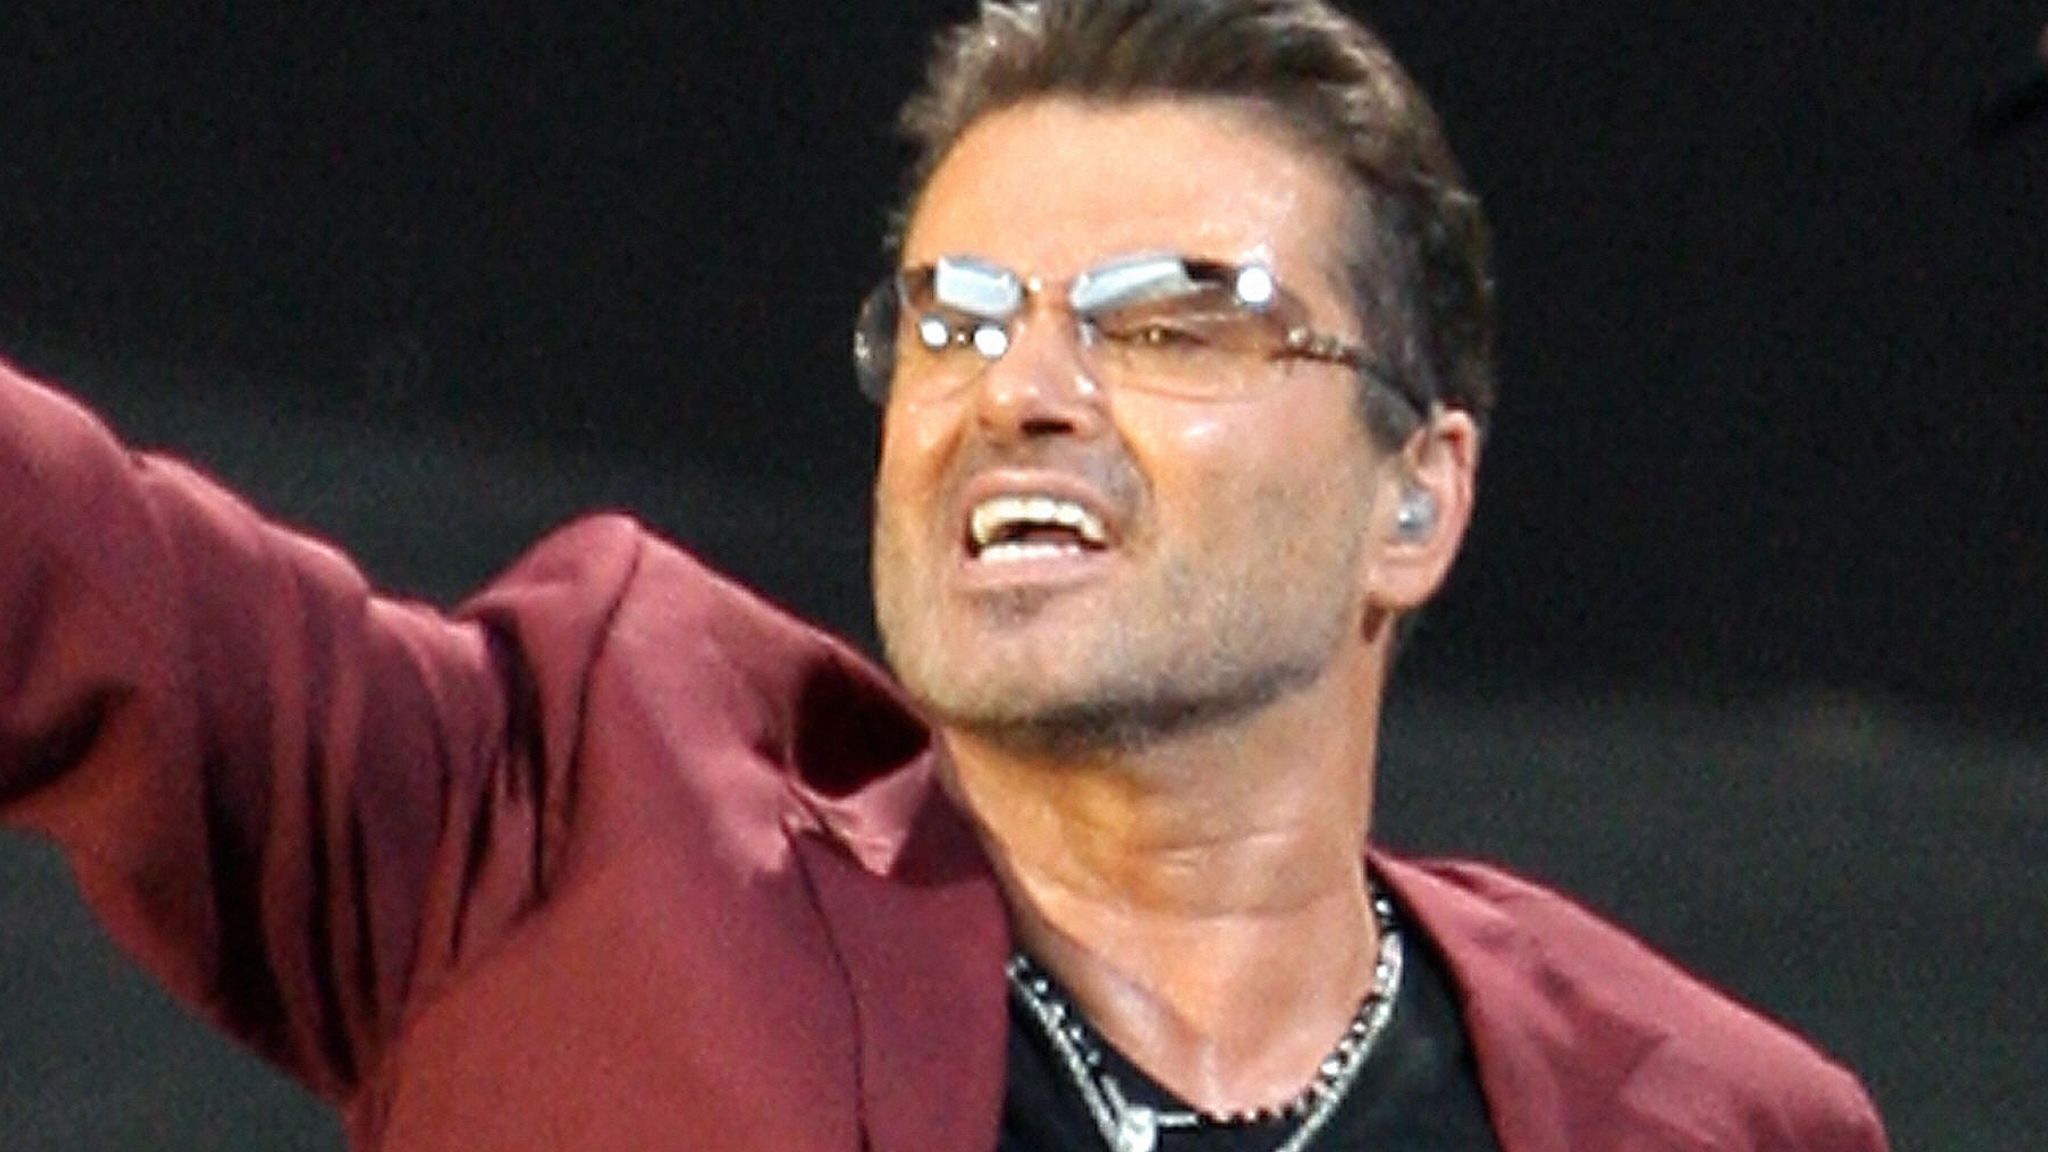 George Michael / George Michael Wikipedia : George michael was an english singer, songwriter, and producer.